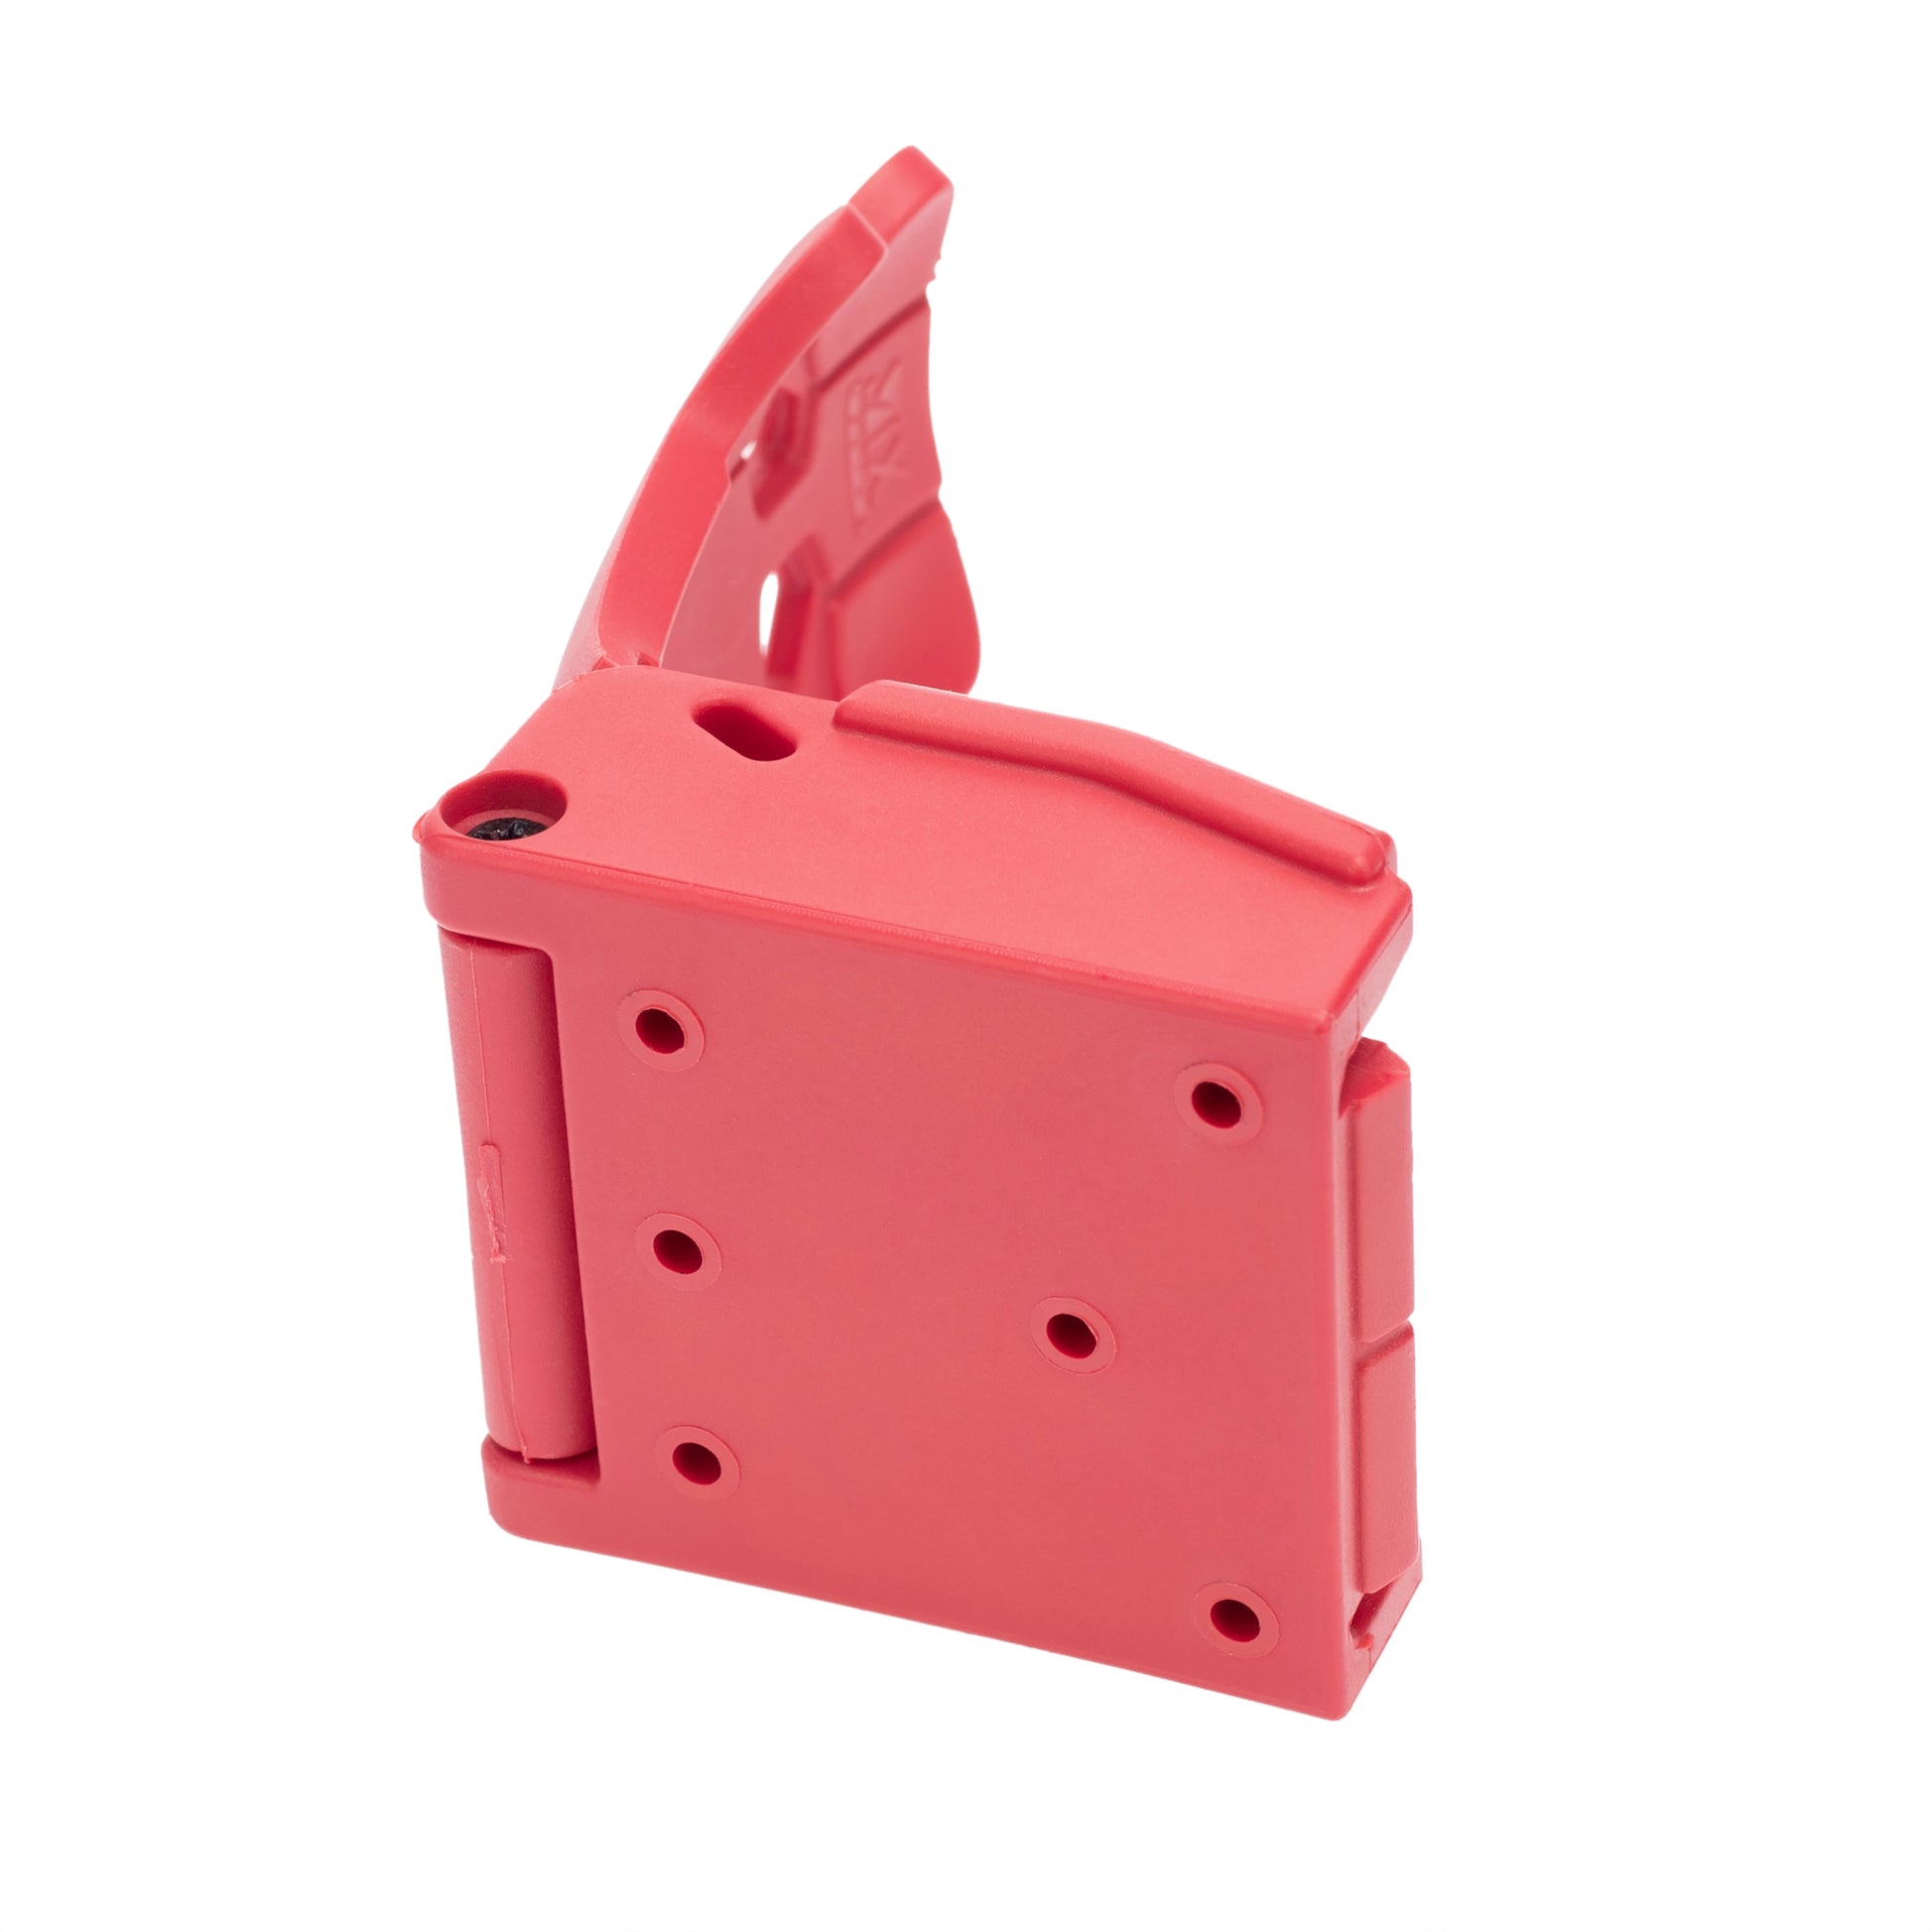 Red Simulation Driving Seat for SCX10, TRX-4-4